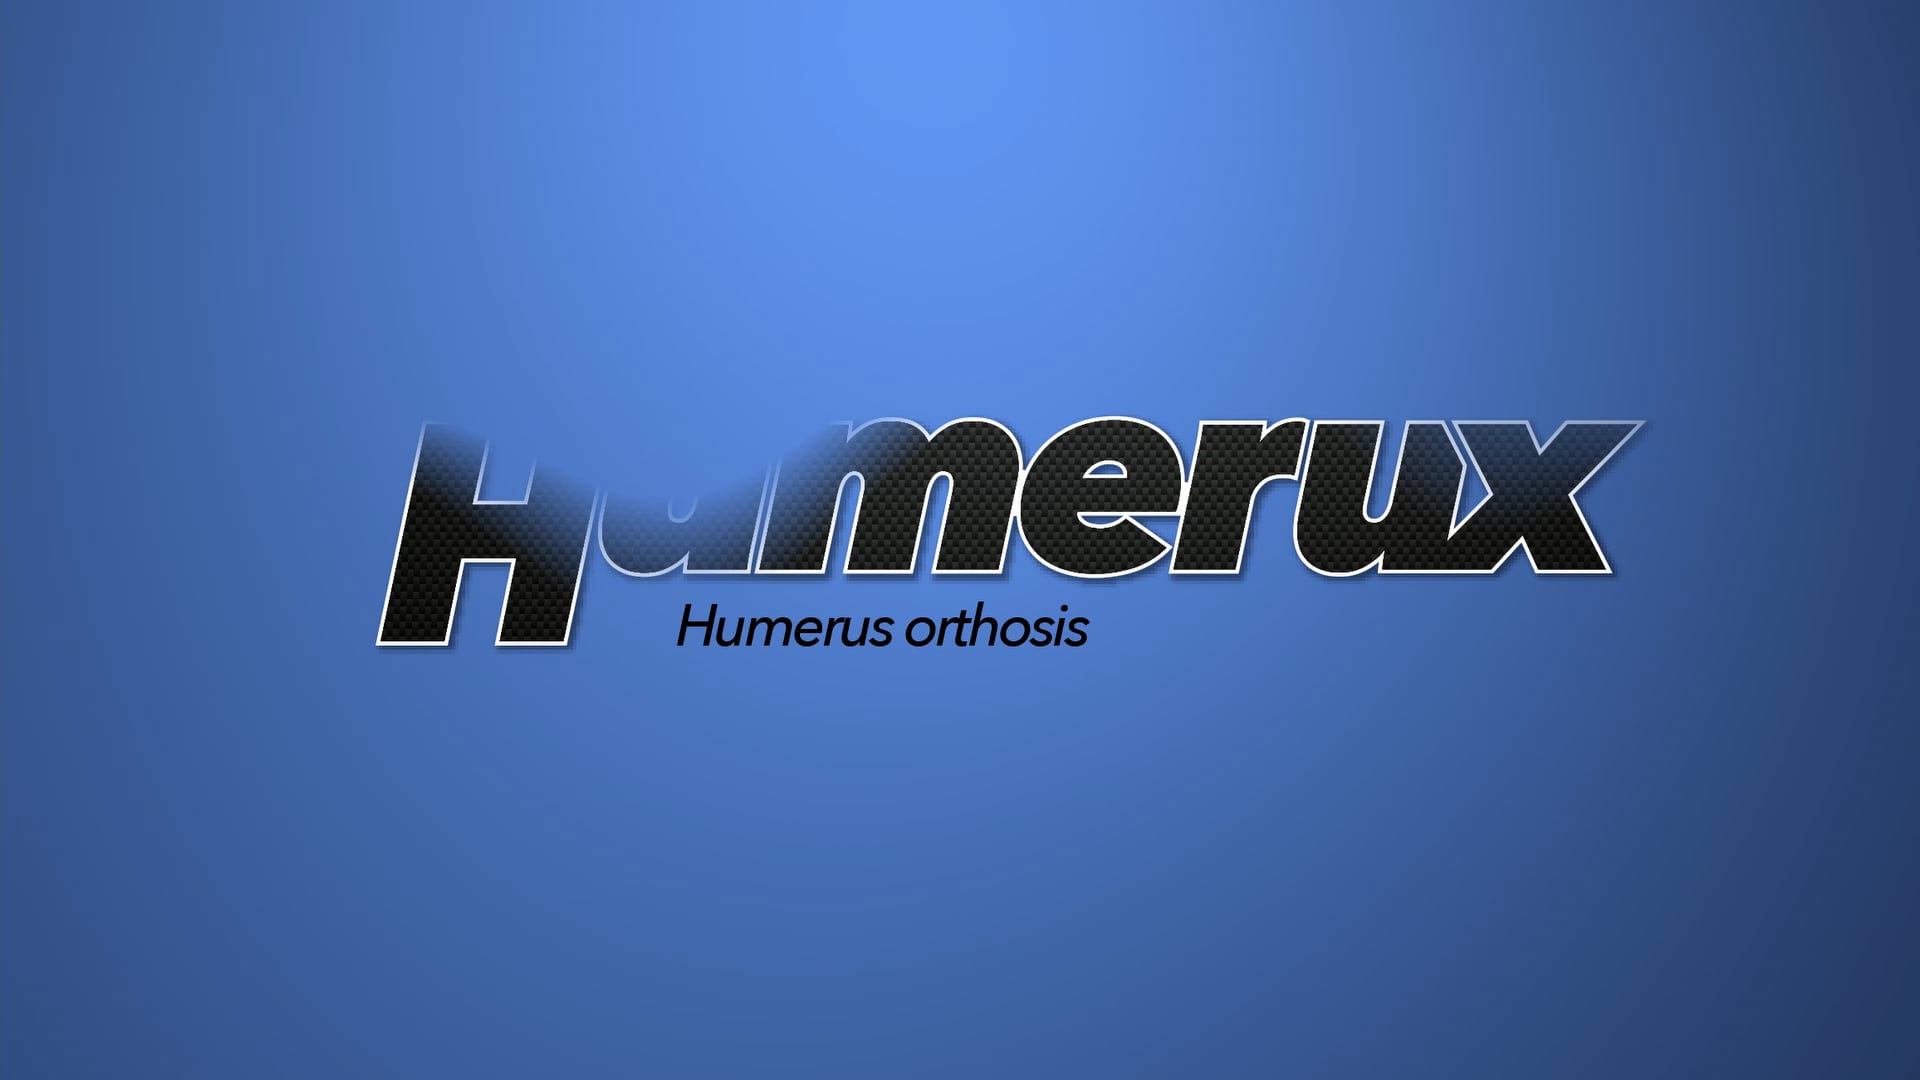 Introducing Humerux